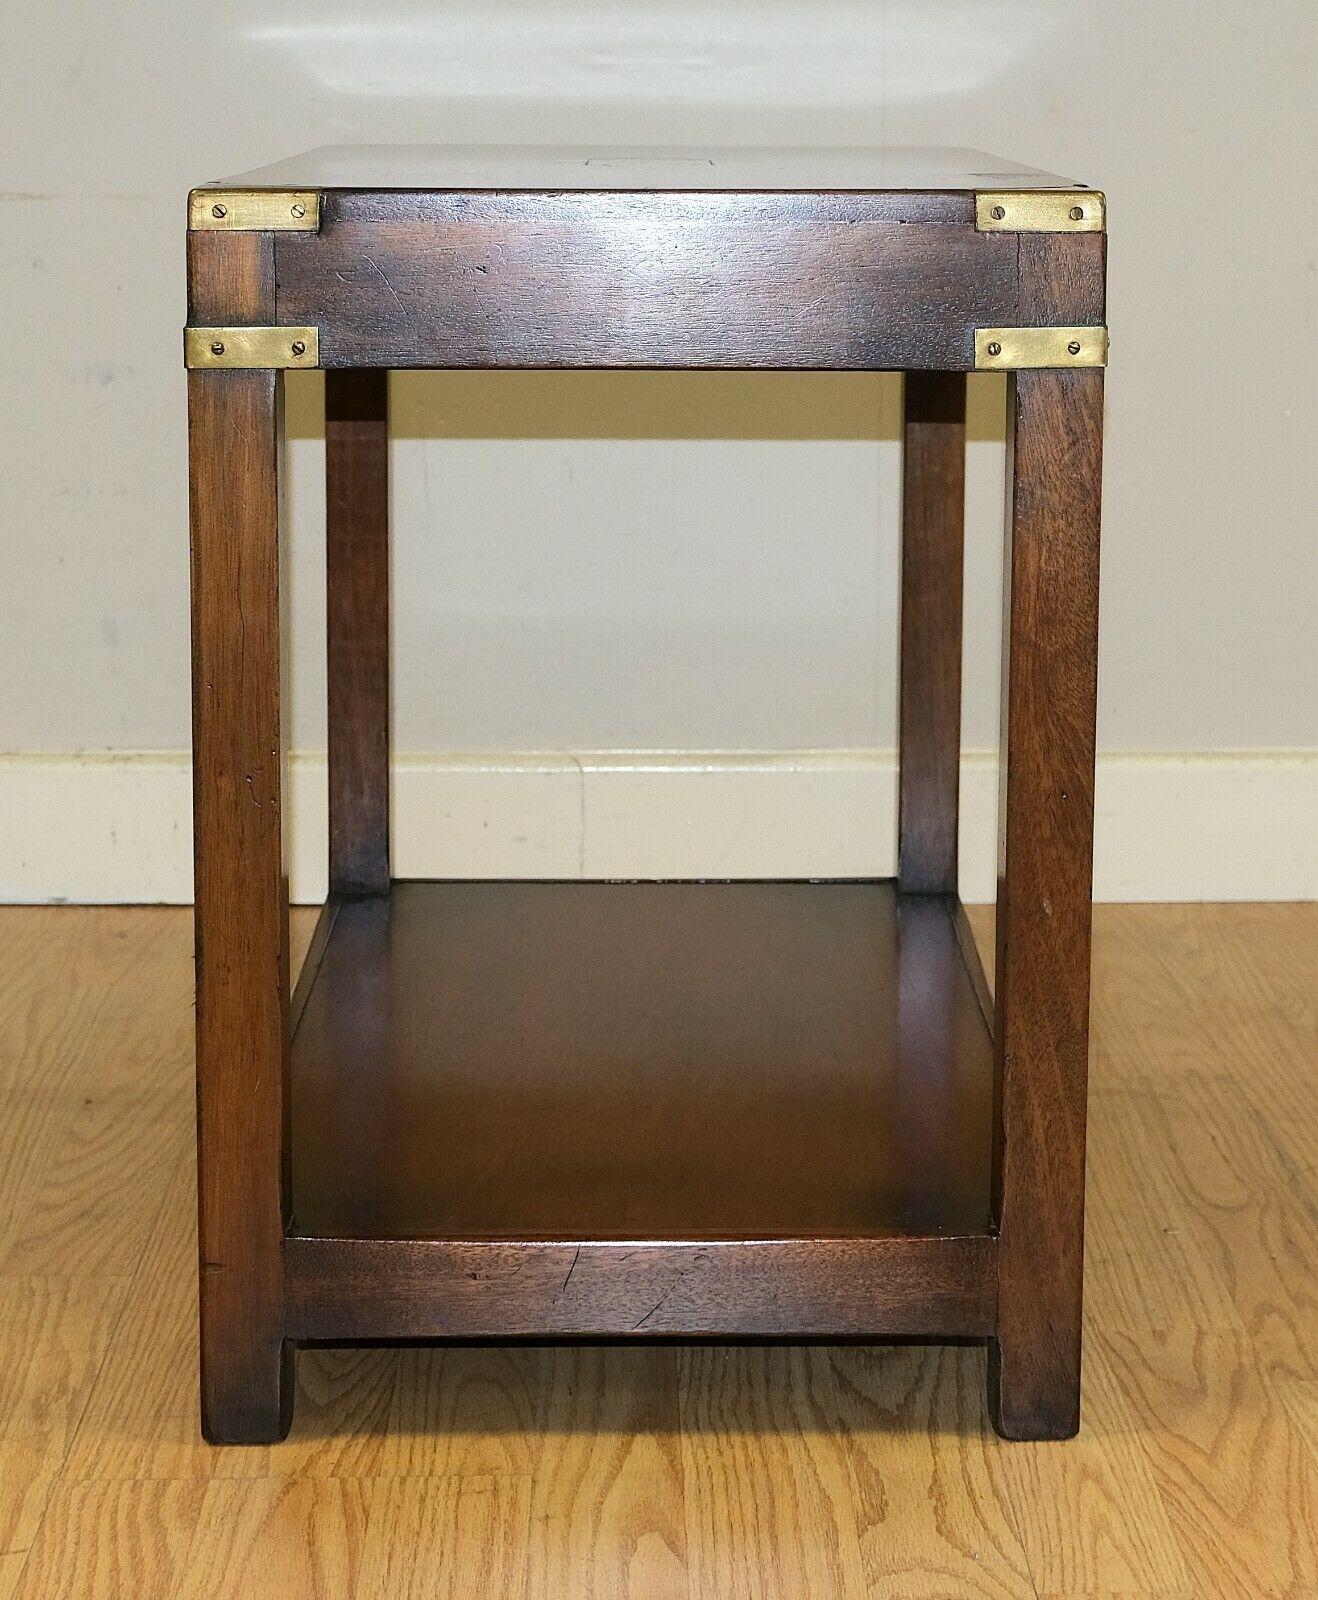 English Lovely Kennedy Campaign Hardwood Side Table Brass Inset on Top & Single Shelf